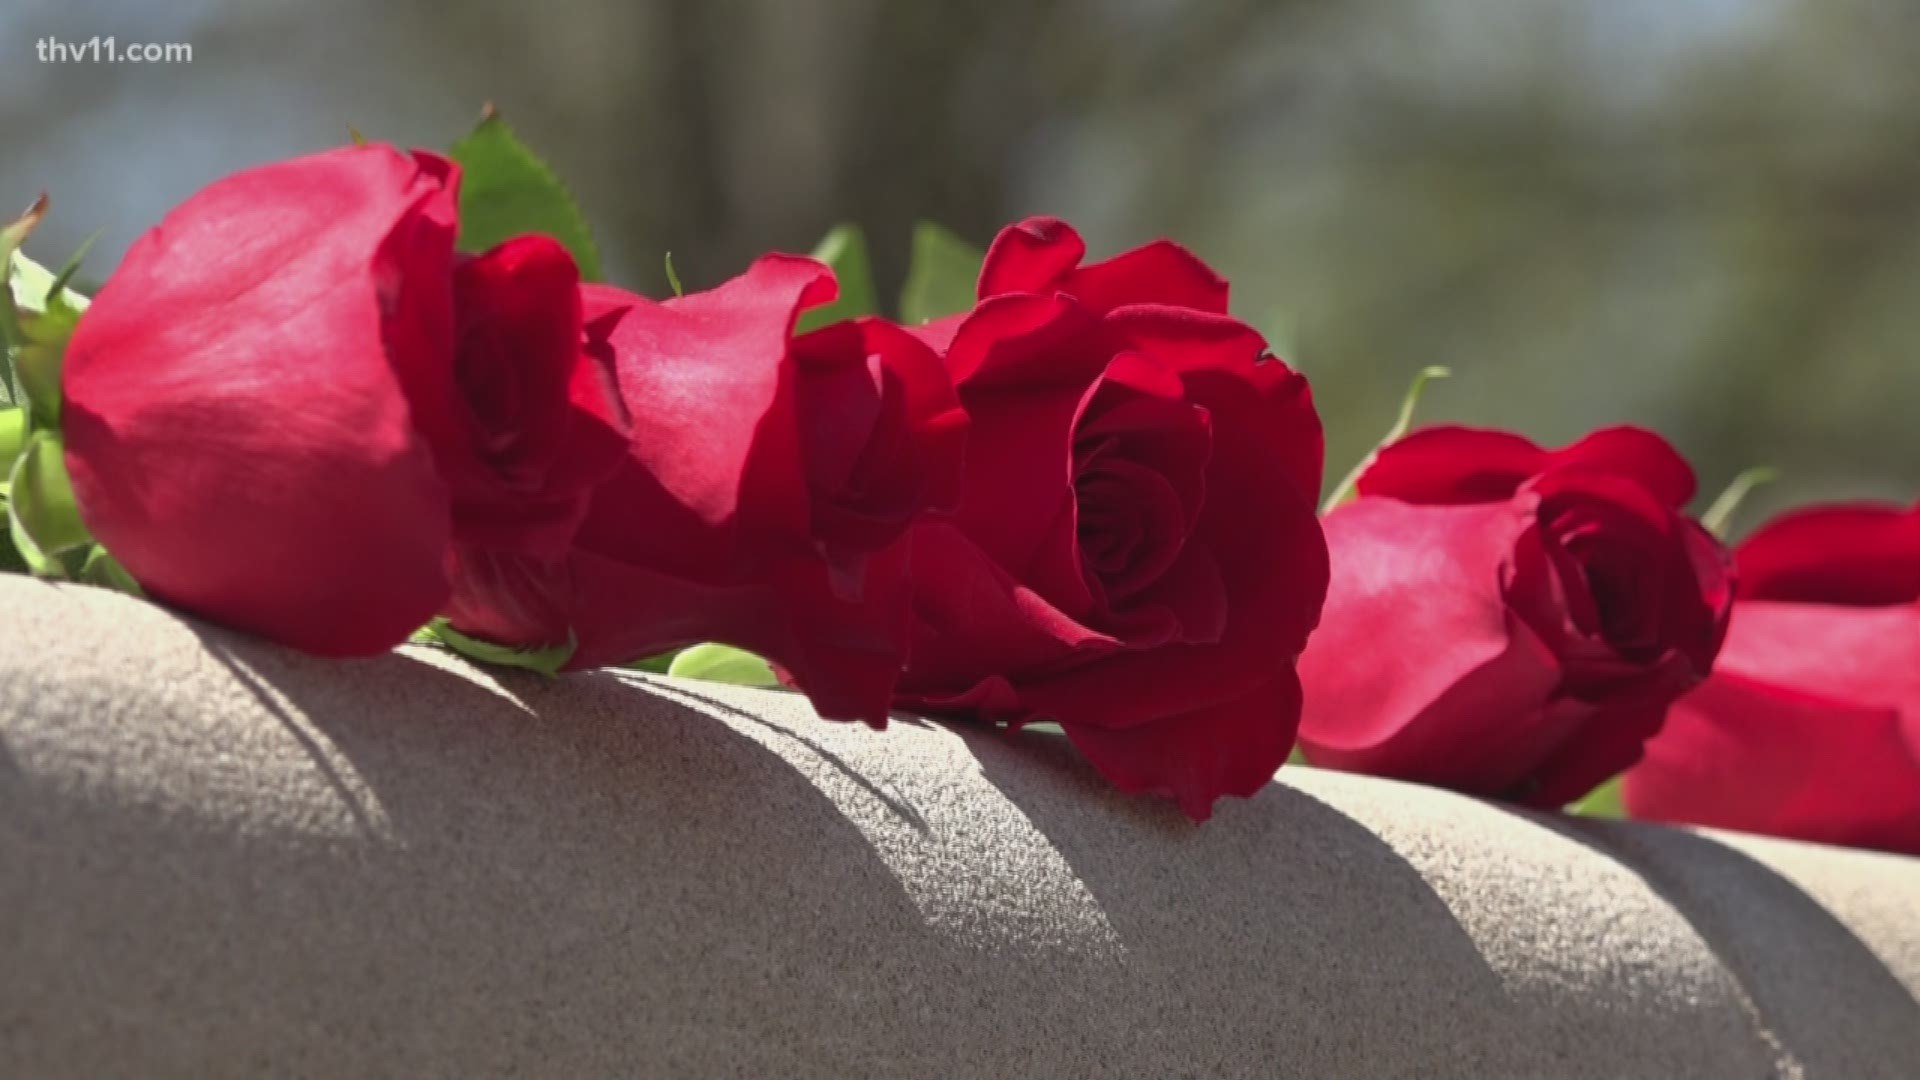 Cancer victims join Arkansas Firefighters' Memorial